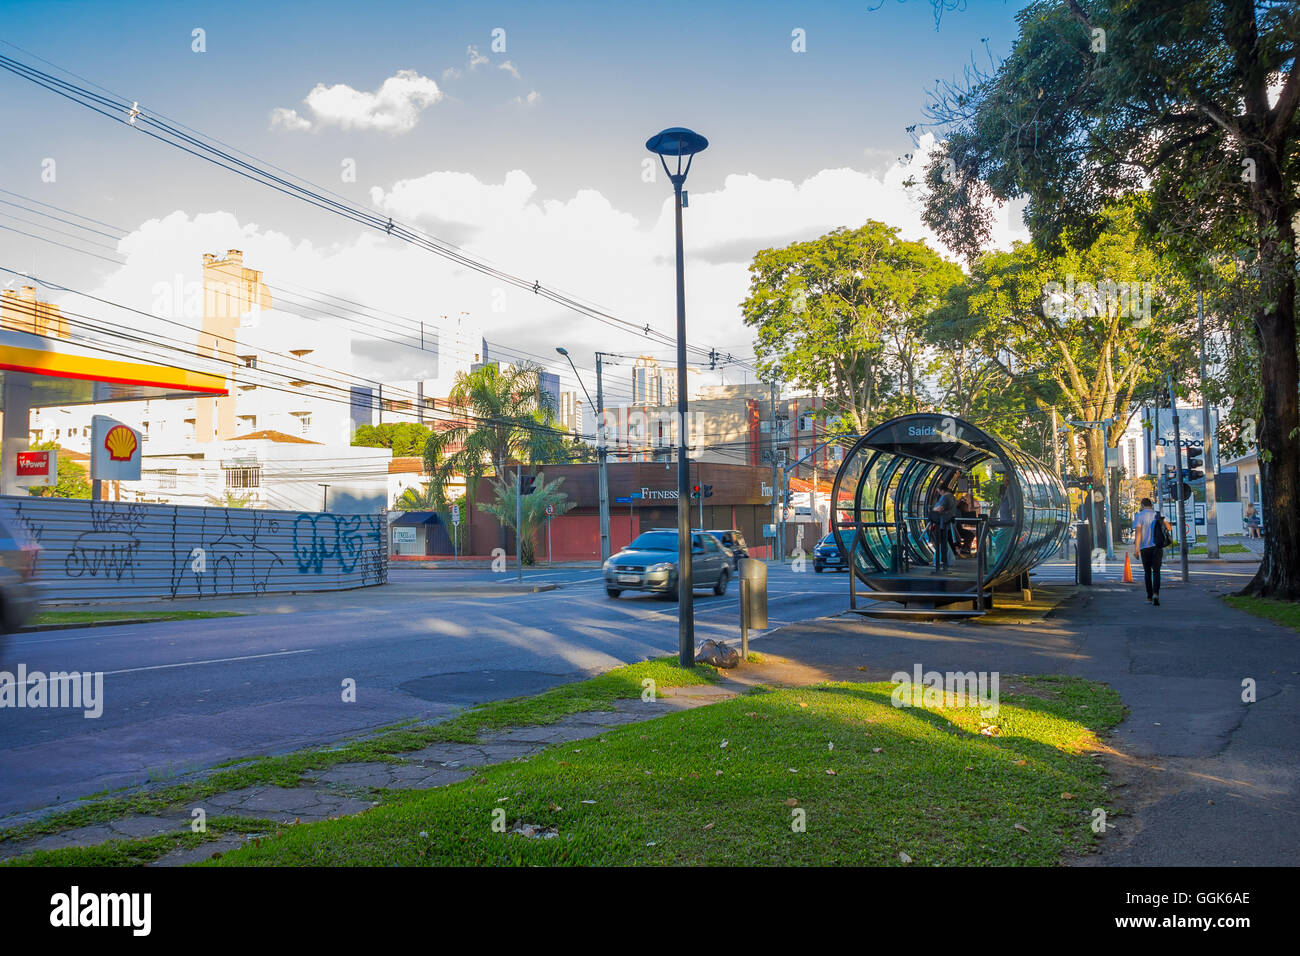 CURITIBA ,BRAZIL - MAY 12, 2016: passengers waiting for the bus on the station while some cars are driving in the street Stock Photo